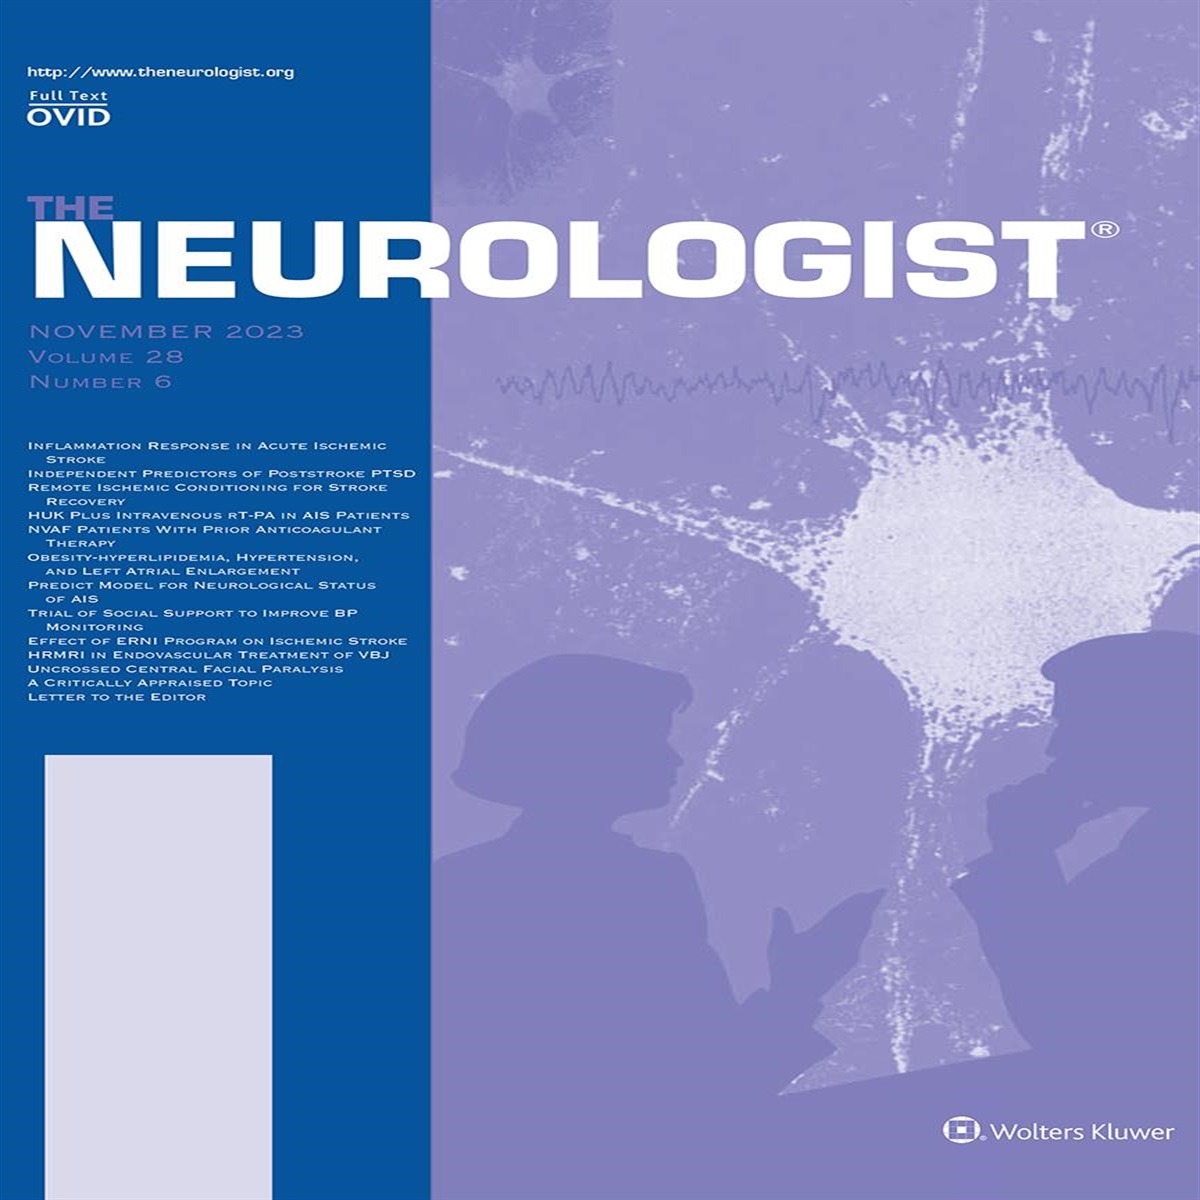 Does Initiation of Prophylactic Antiseizure Medication Improve Neurological Outcomes in Patients With Acute Intracerebral Hemorrhage?: A Critically Appraised Topic